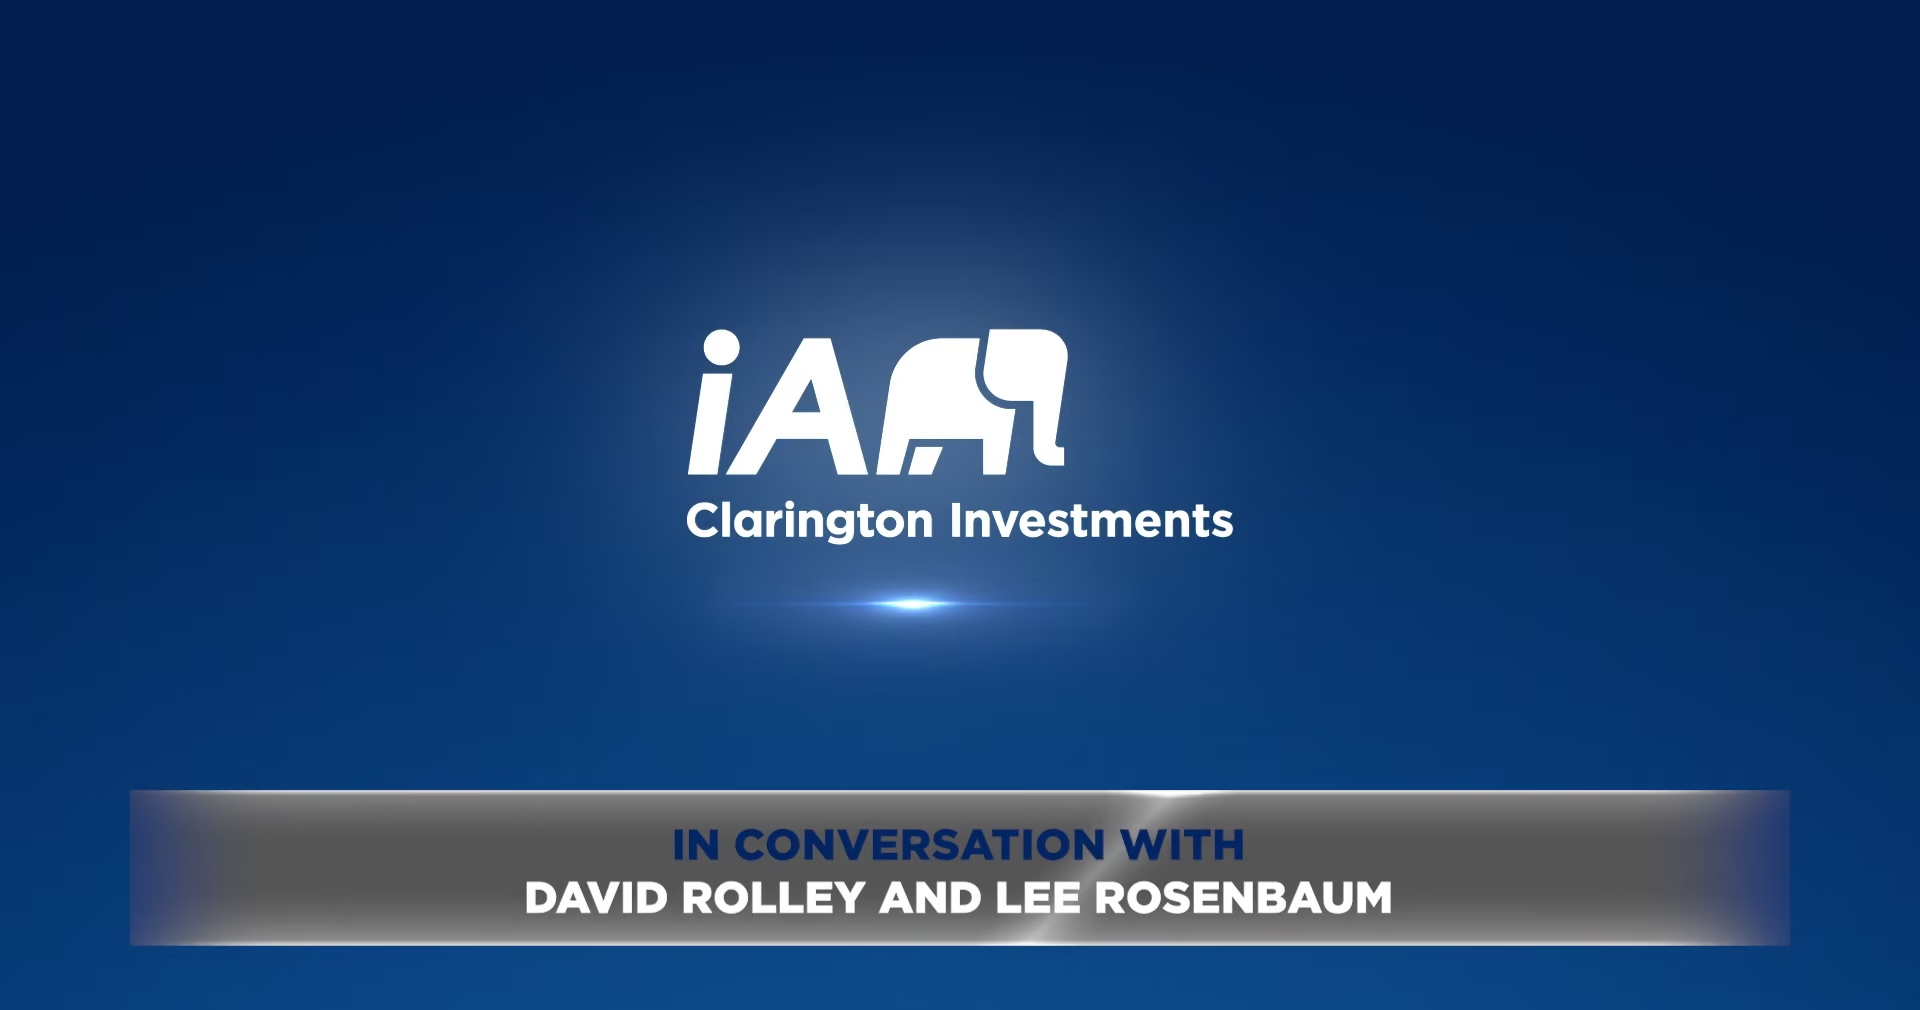 David Rolley and Lee Rosenbaum provide an update on the IA Clarington Loomis Global Allocation Fund.